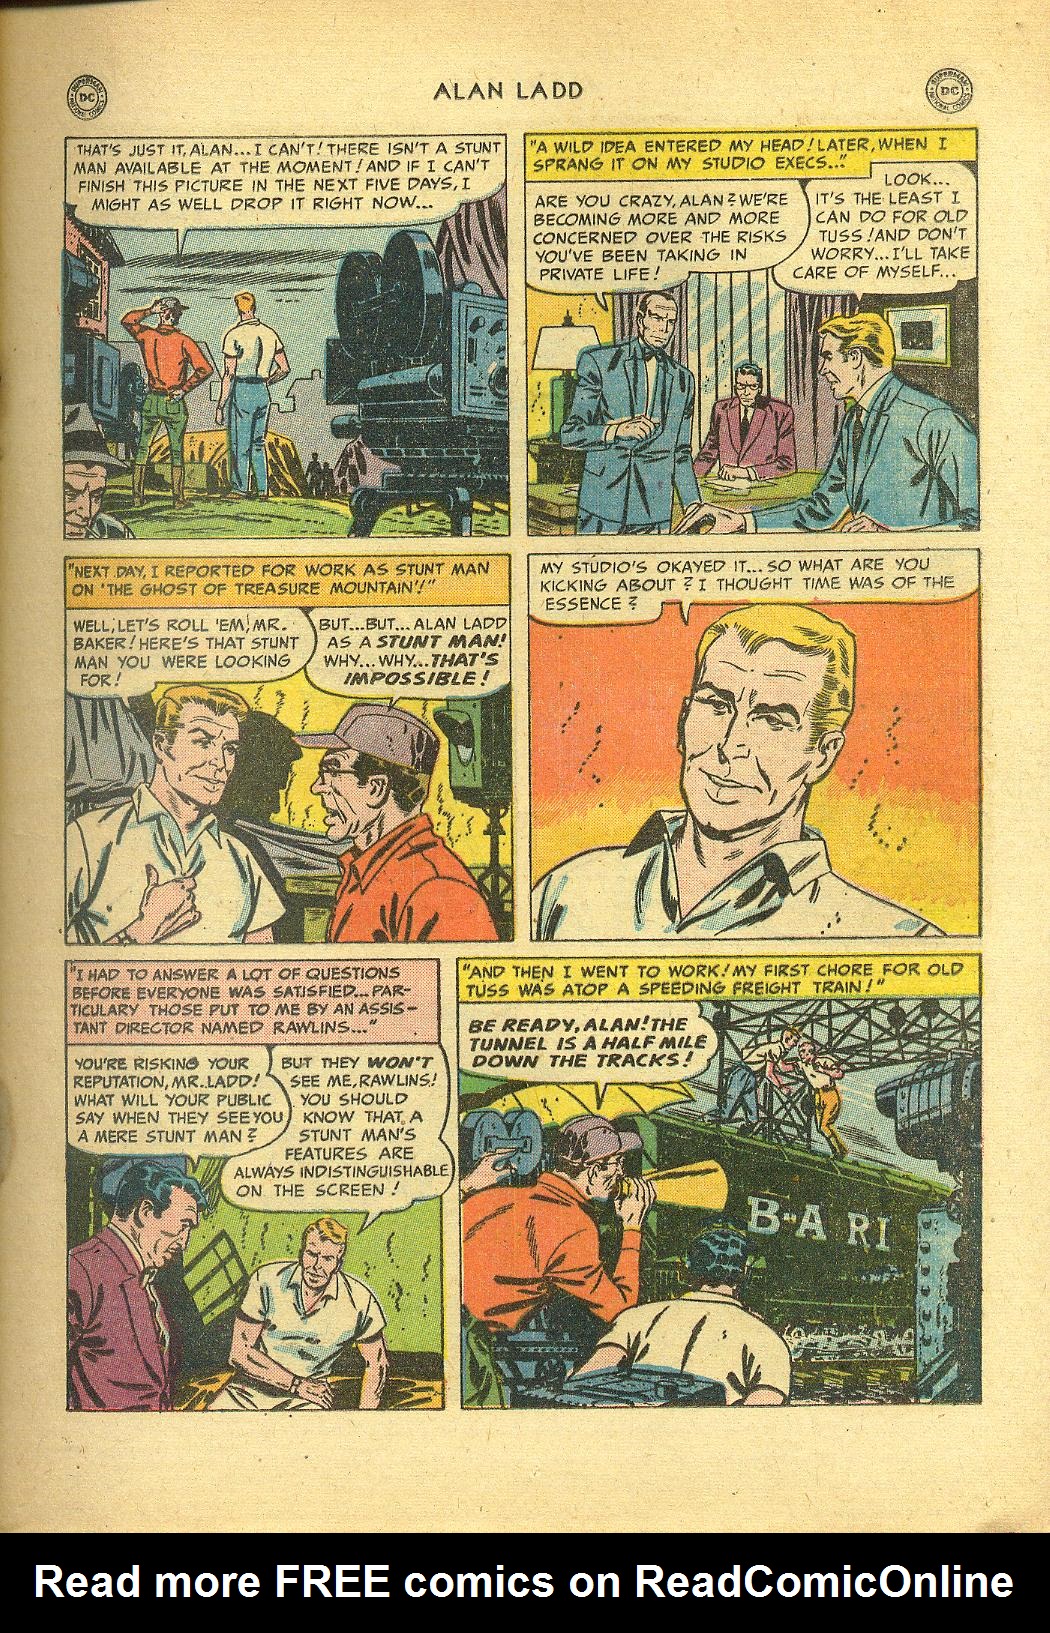 Read online Adventures of Alan Ladd comic -  Issue #3 - 17